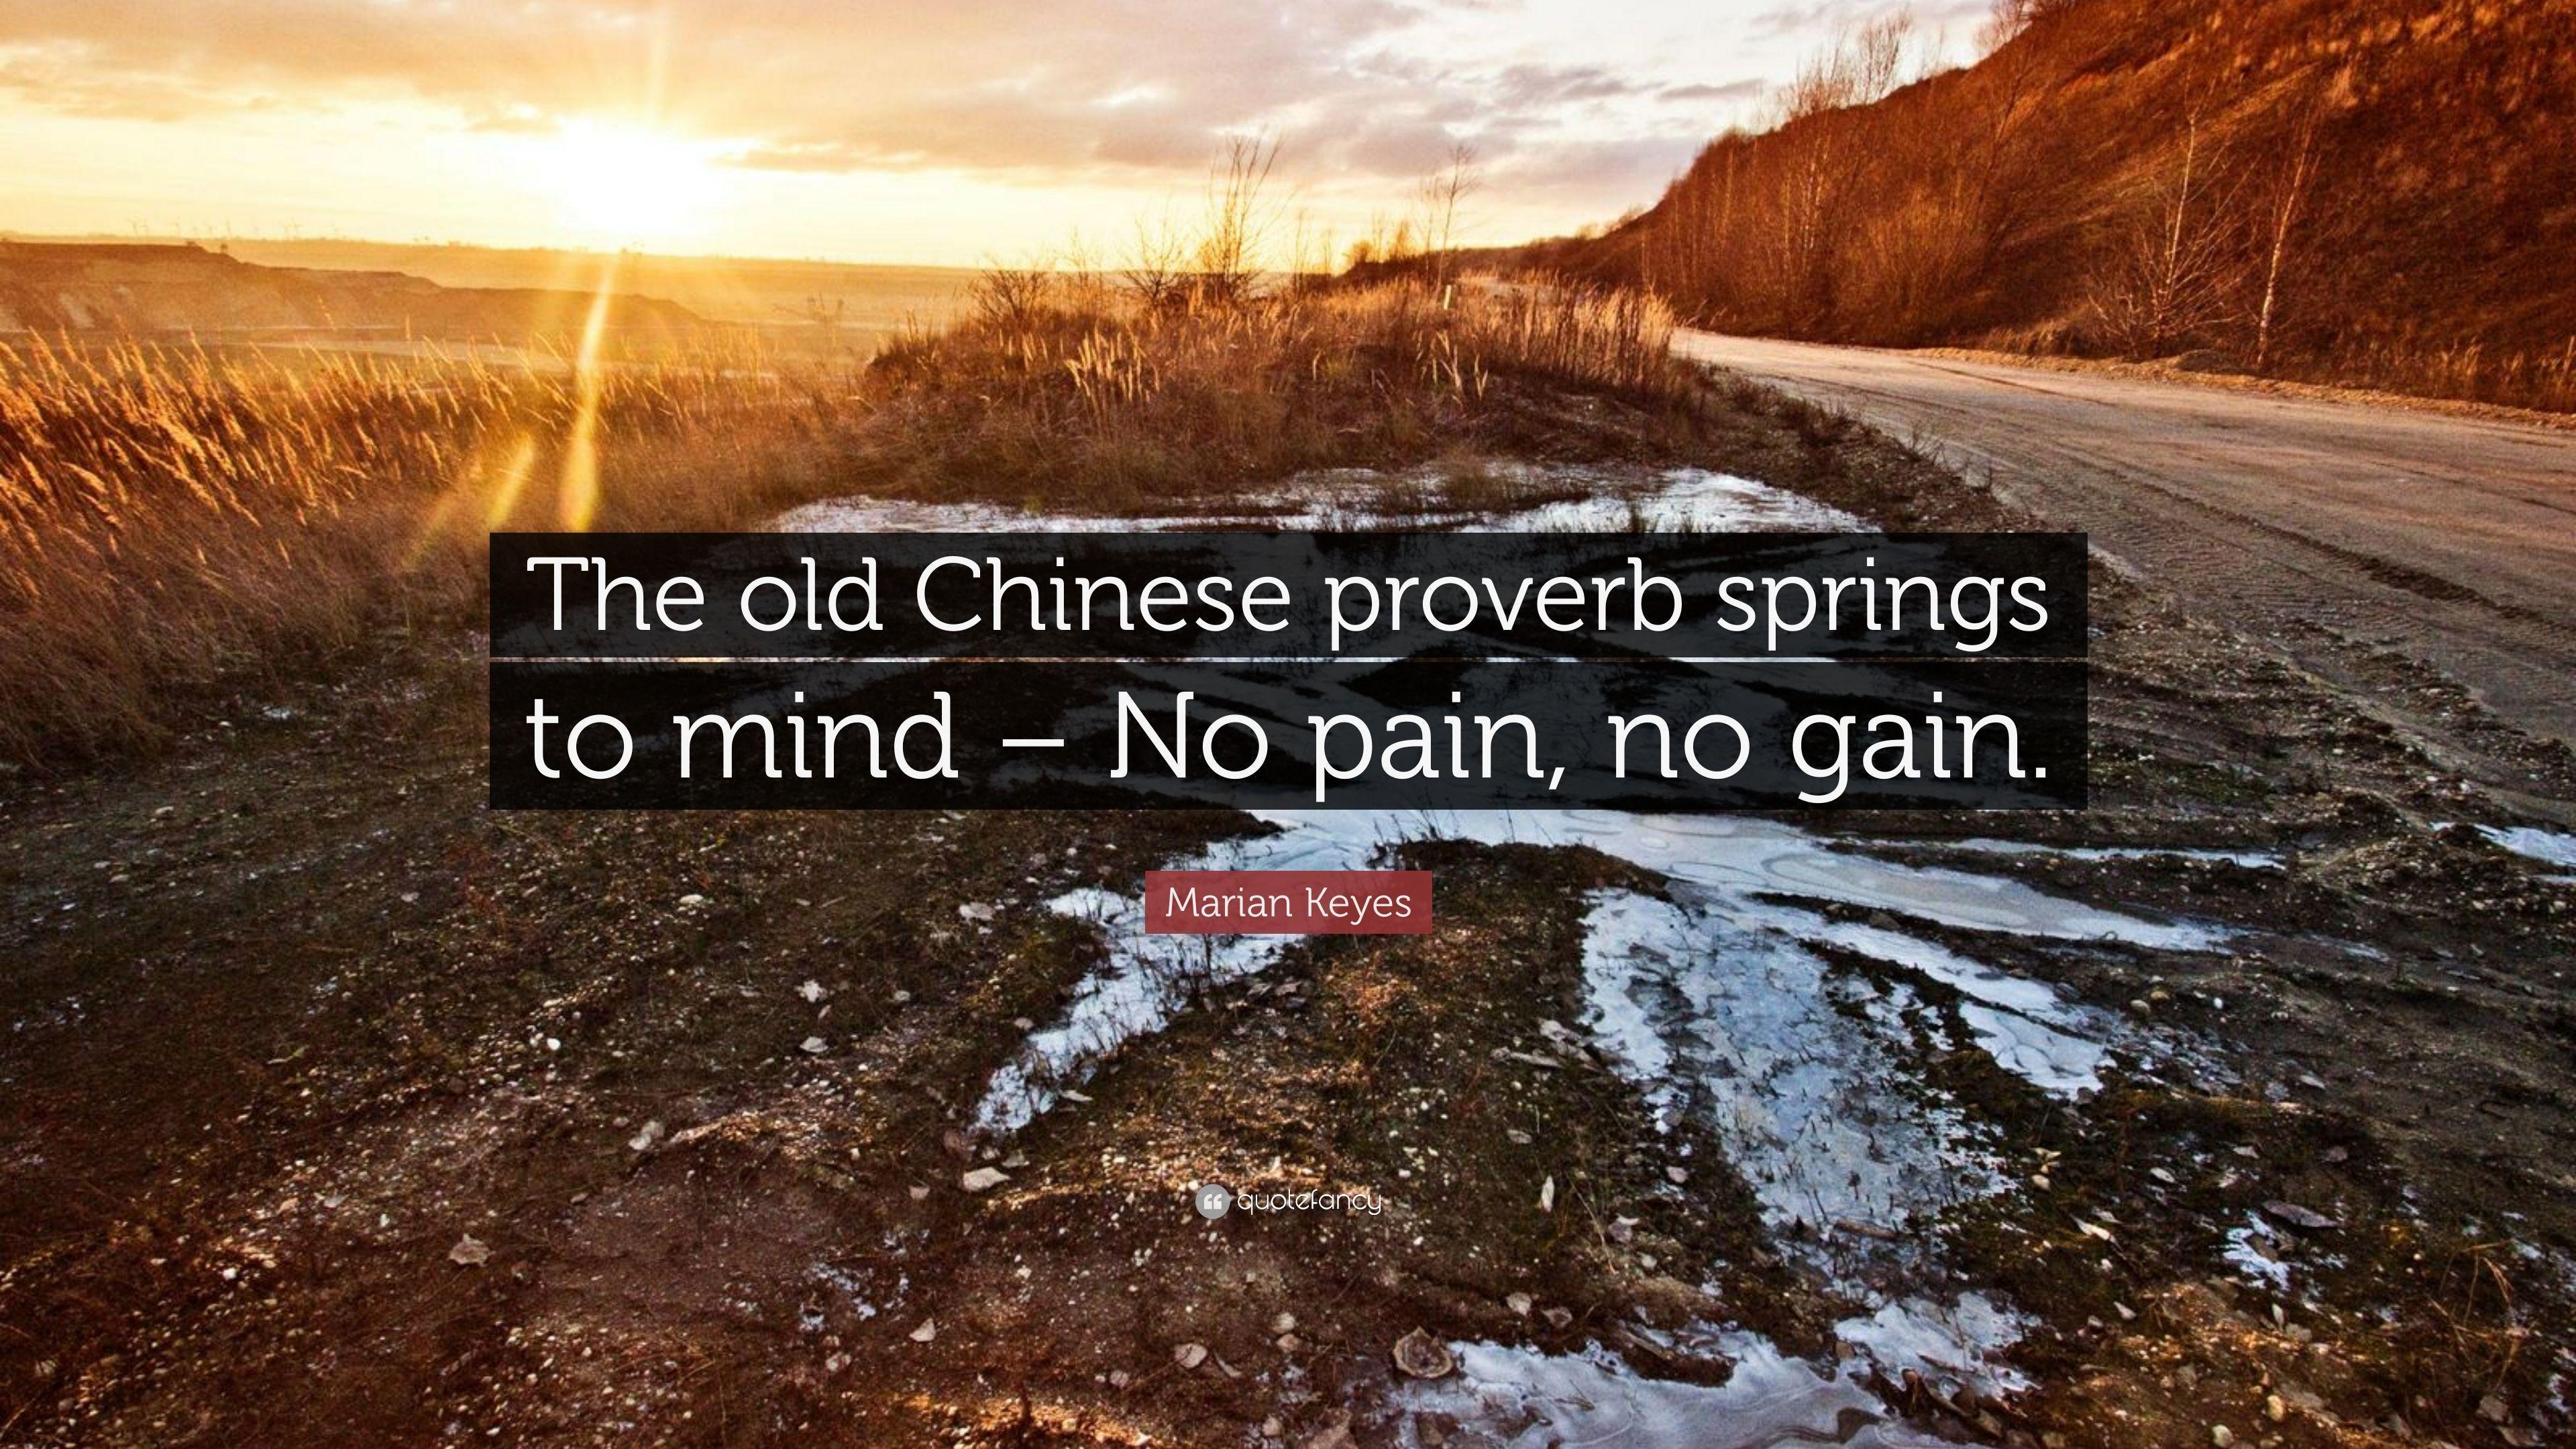 Marian Keyes Quote: “The old Chinese proverb springs to mind – No